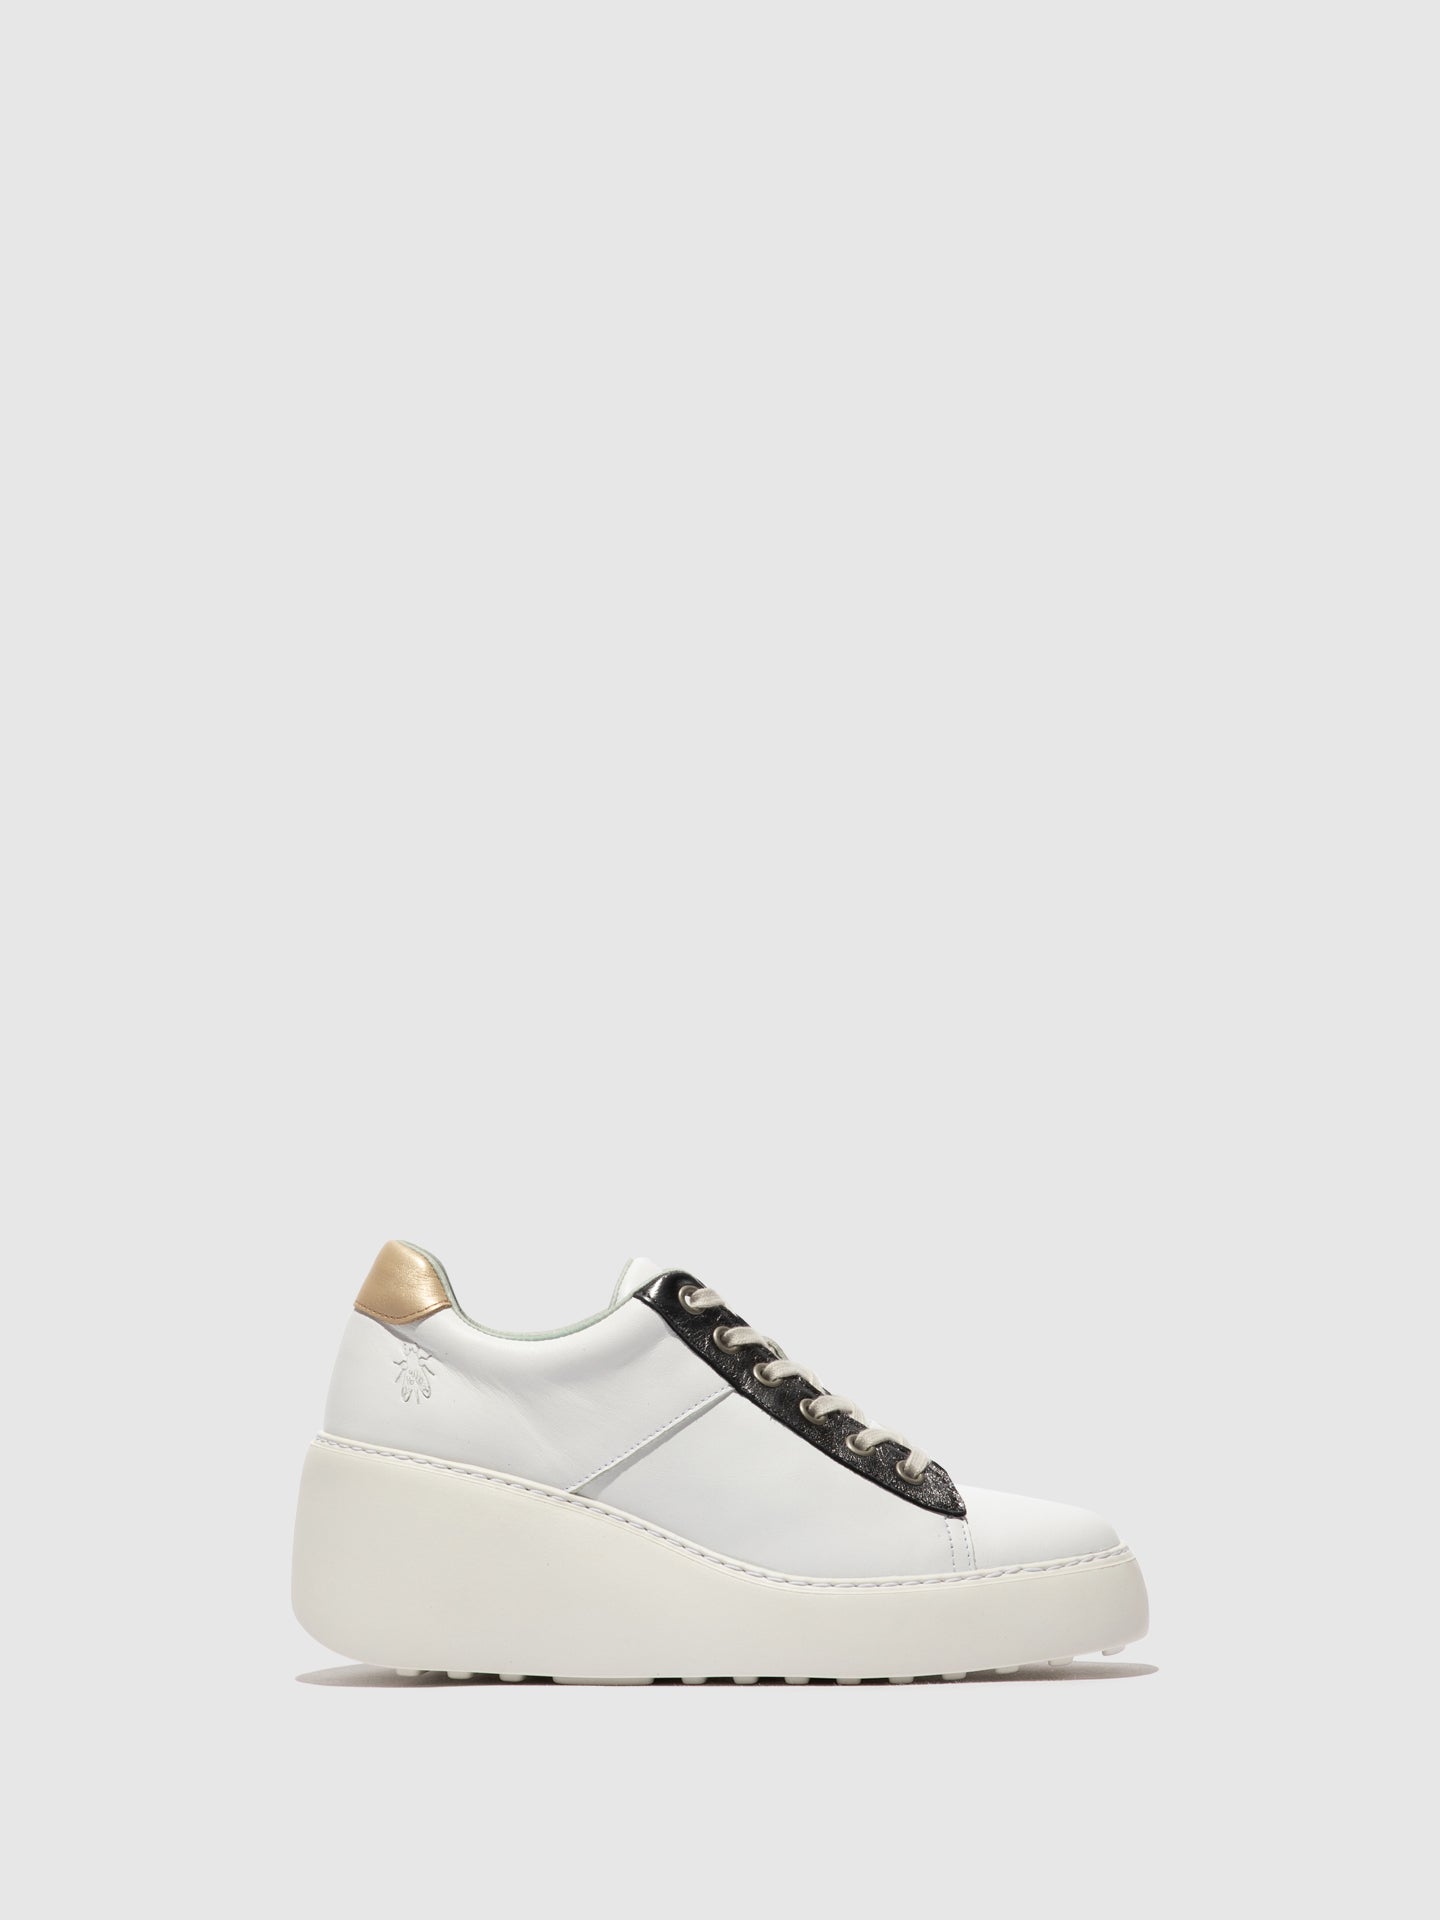 Lace-up Trainers DELF580FLY WHITE/GRAPHITE/GOLD – Fly London EU